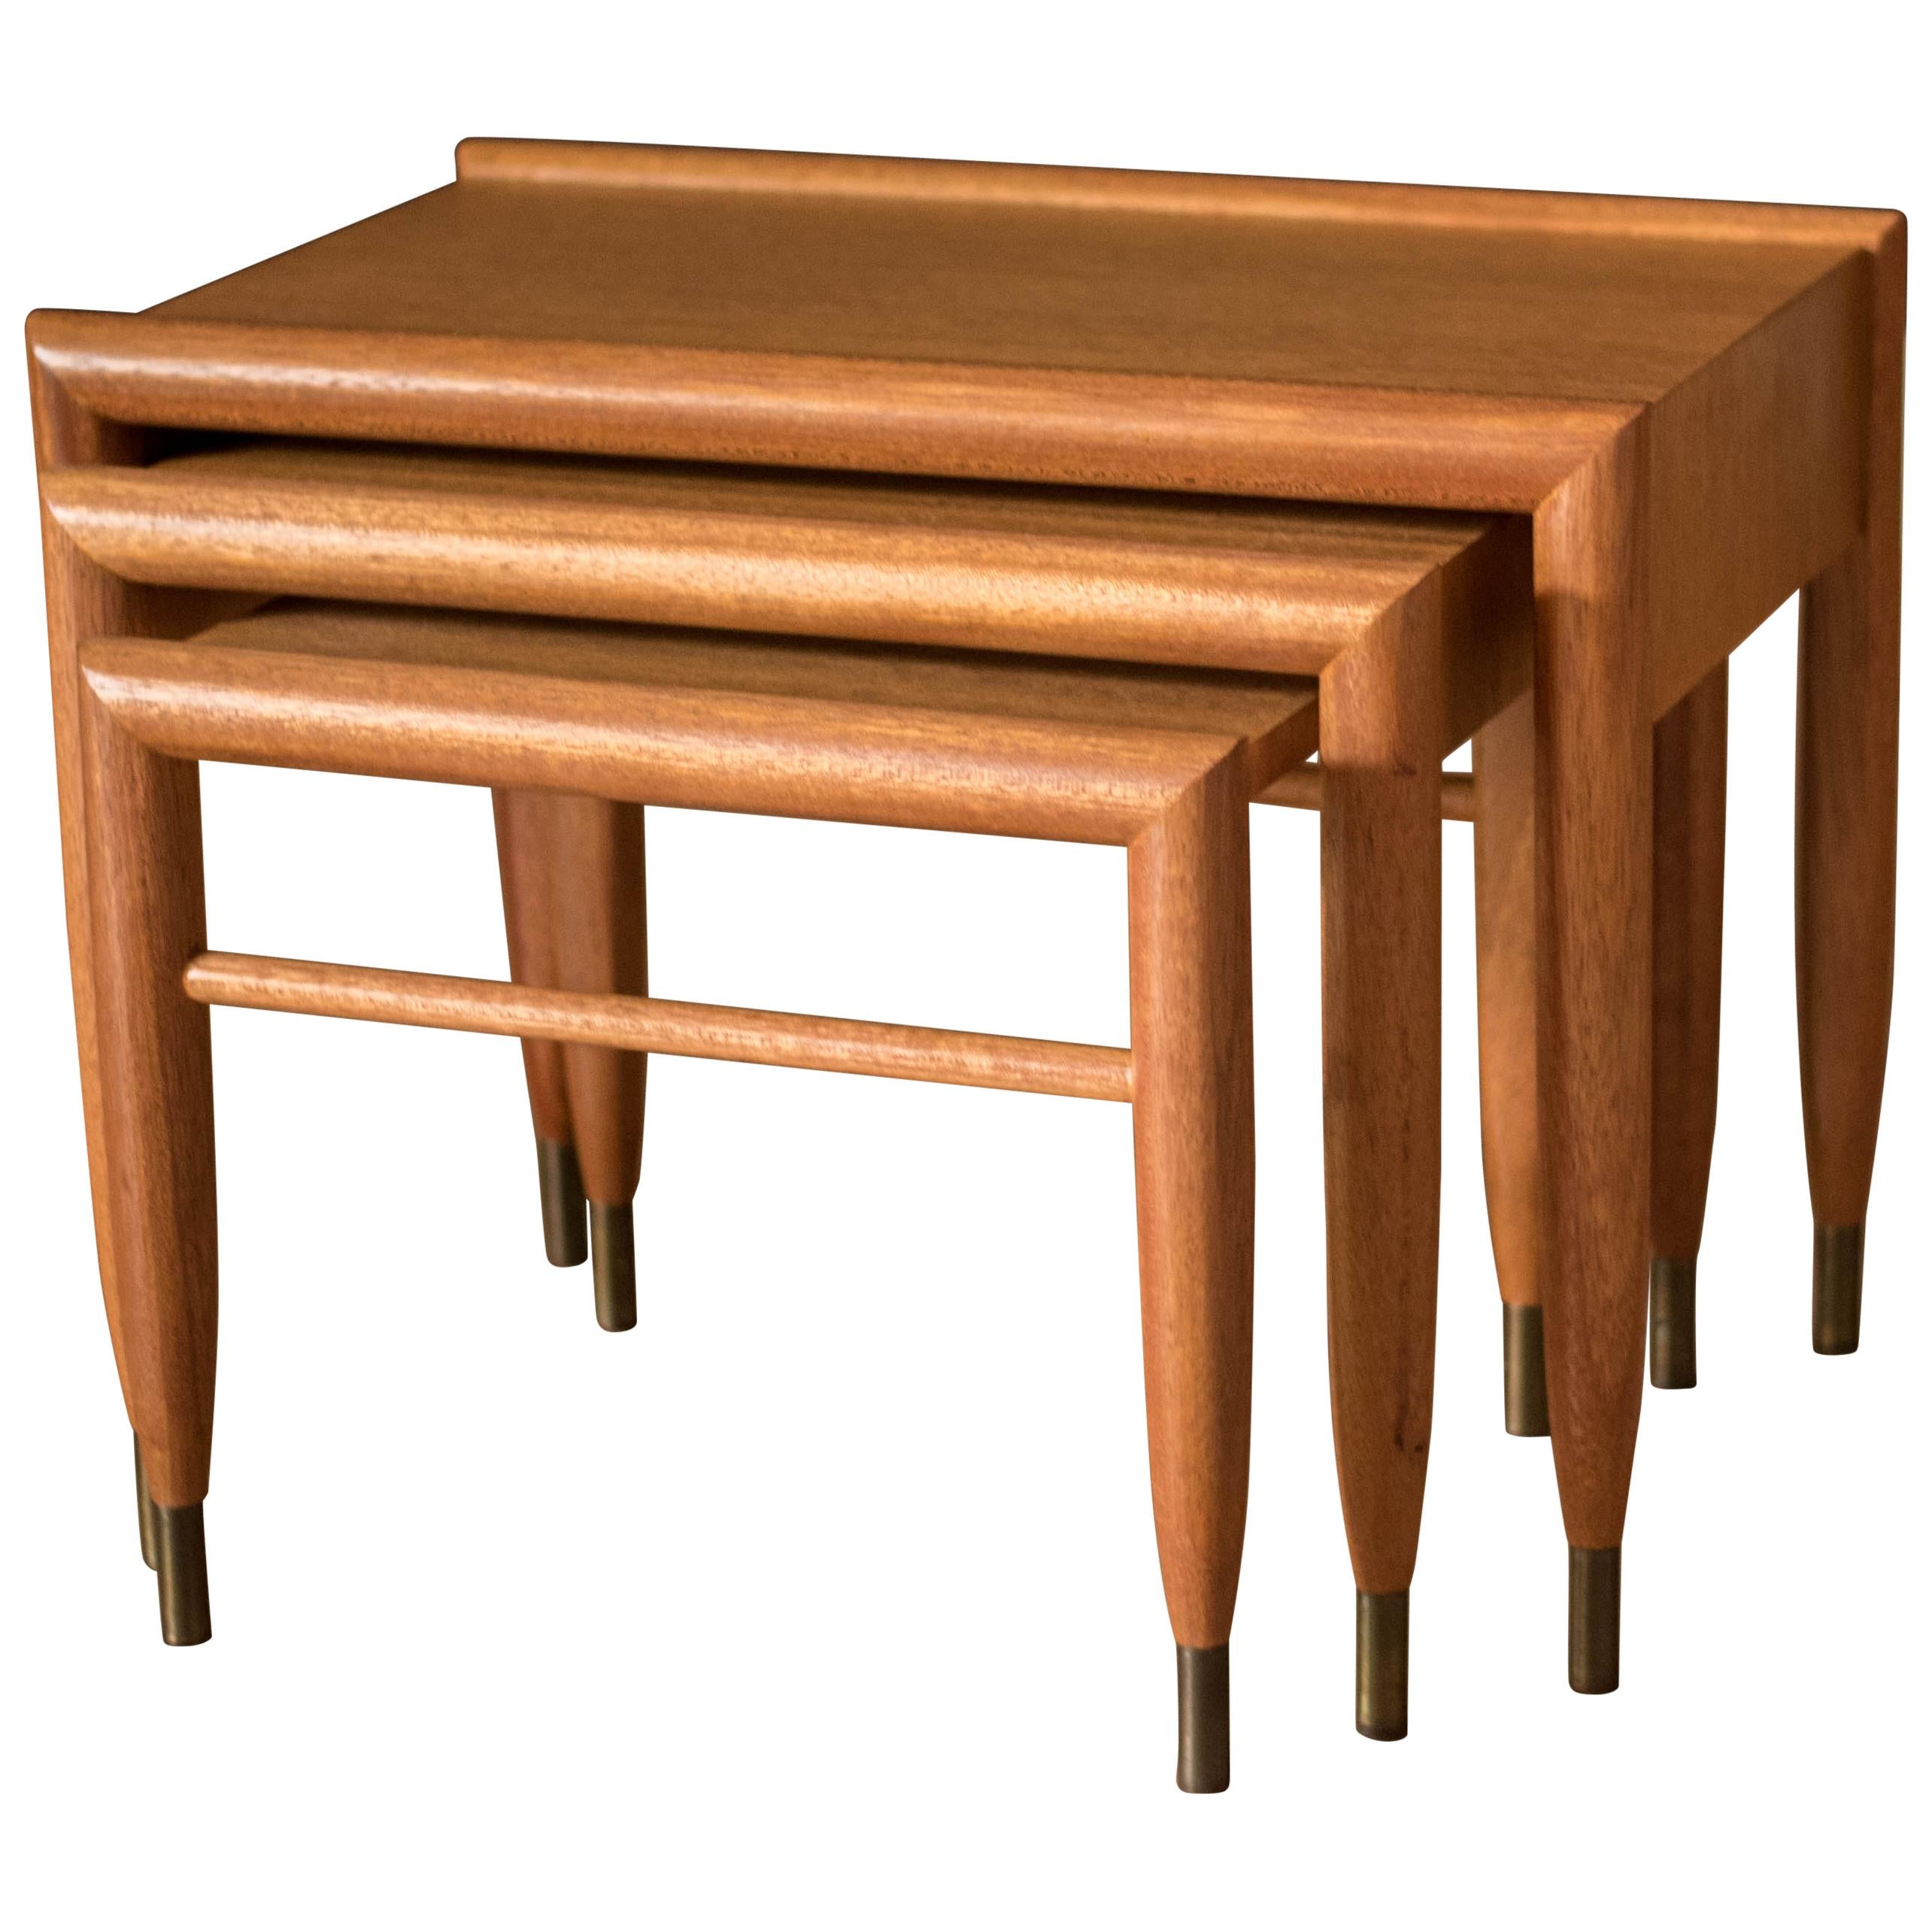 John Keal Nesting Tables and Stacking Tables